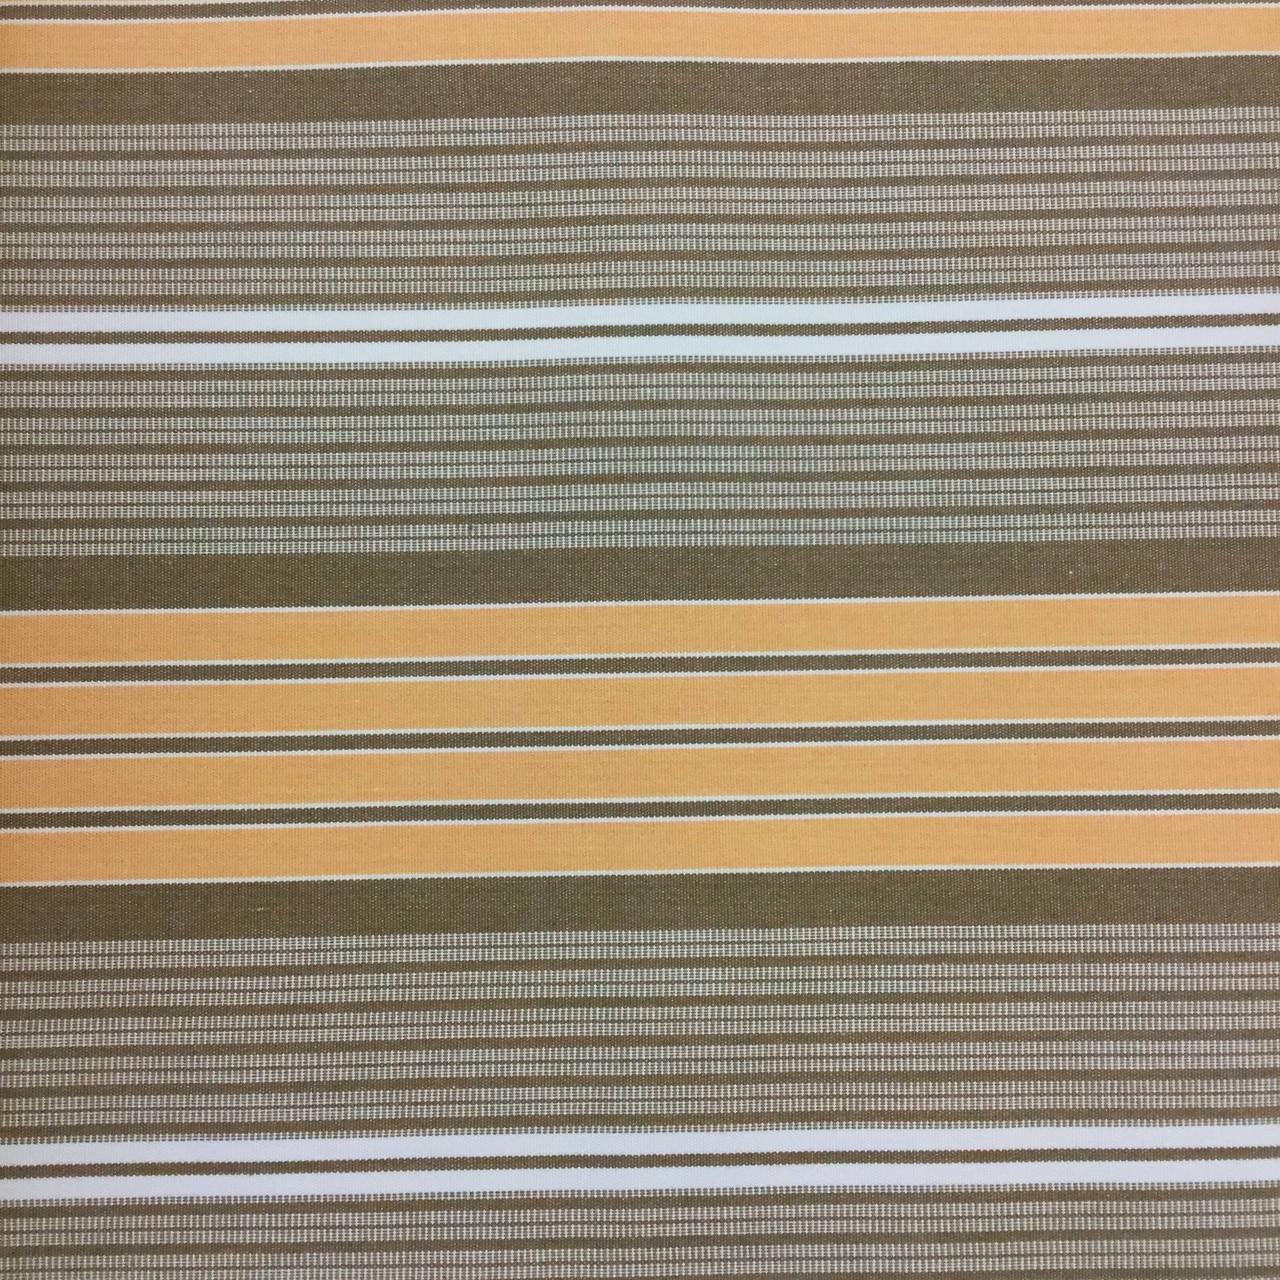 9.55 Yard Piece of Vintage Striped Sunbrella, Orange / Brown / White, Outdoor Awning / Upholstery